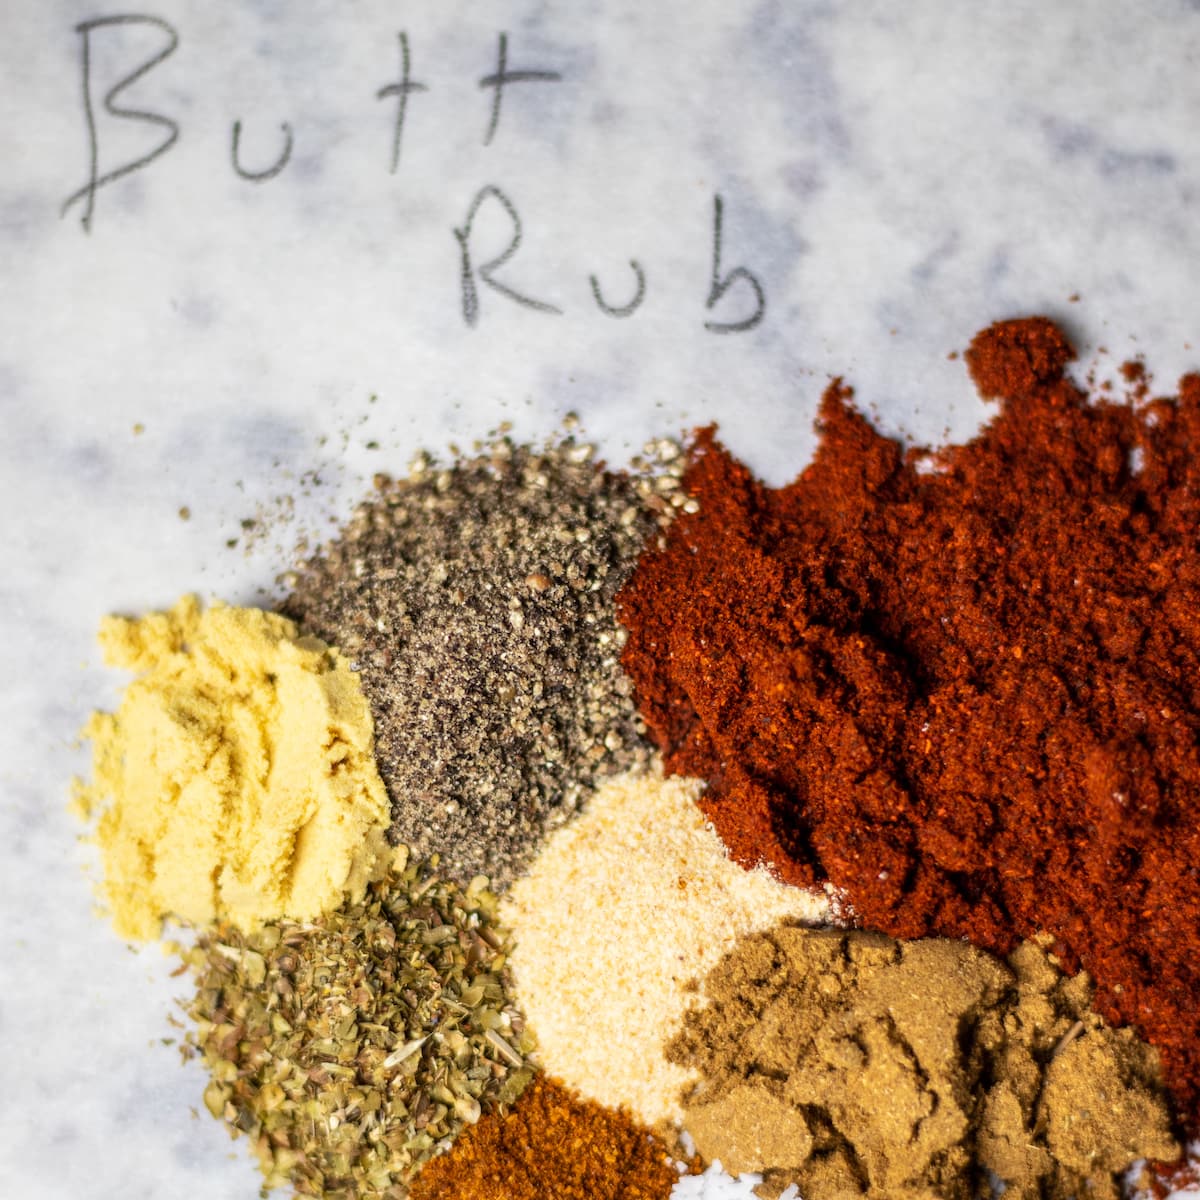 spices from the recipe.